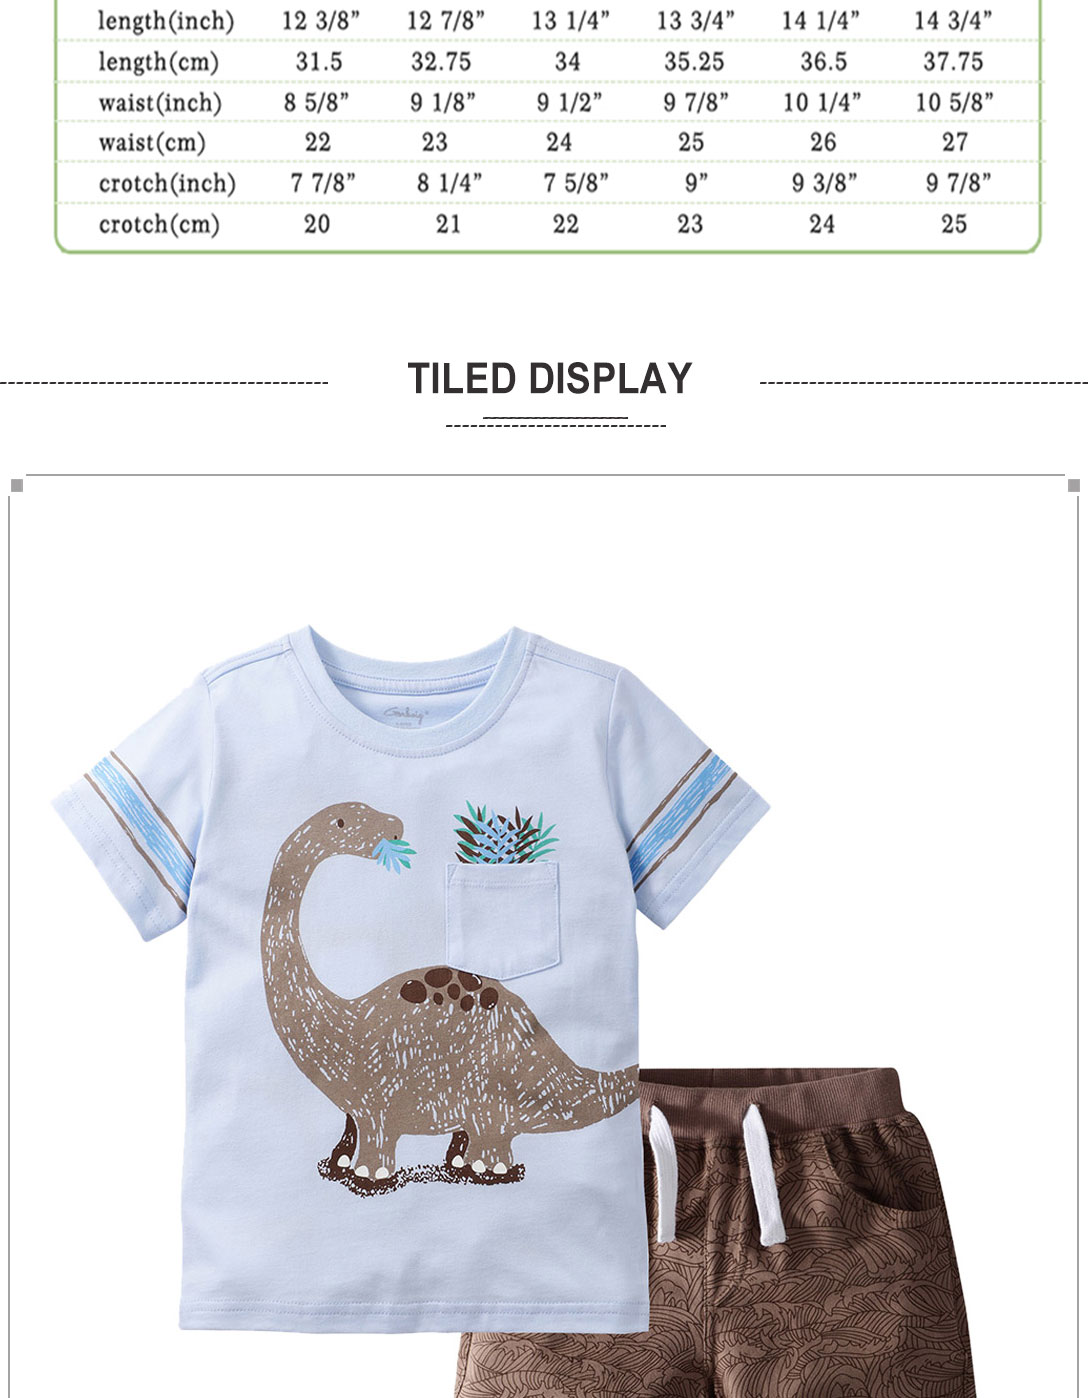 Dinosaur T-Shirt And Shorts for Toddler Summer outfits